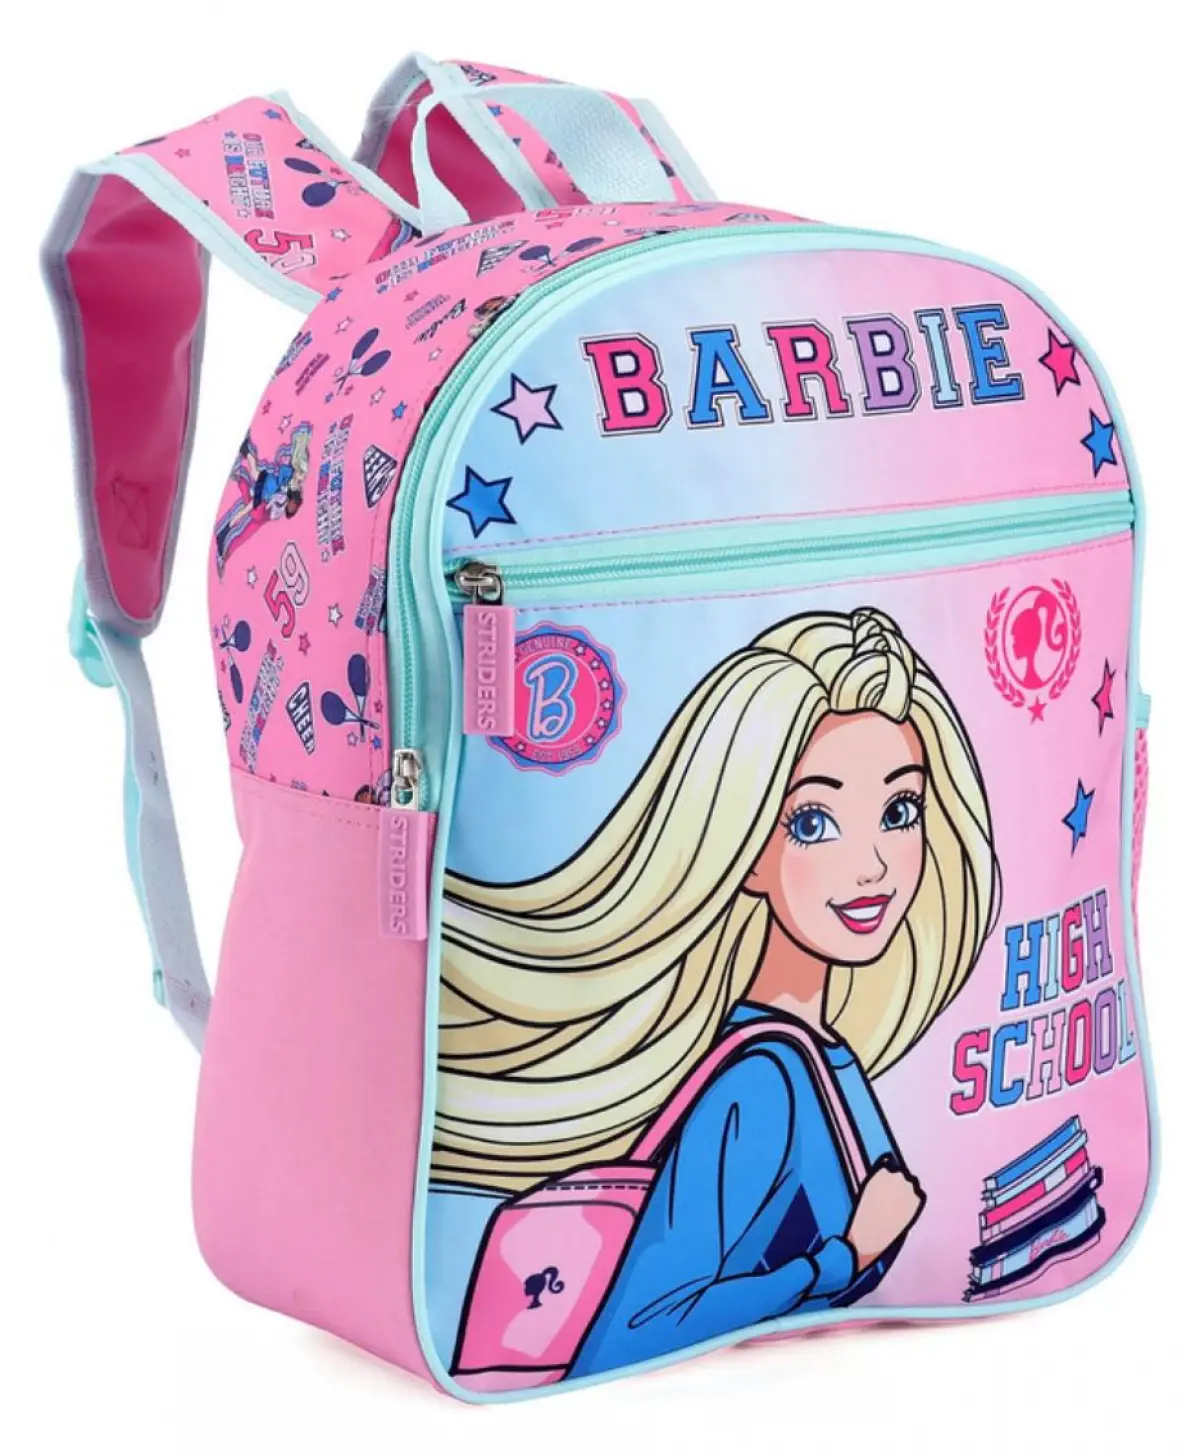 Striders 13 inches Barbie School Bag Dreams in Style for Little Fashionistas Multicolor For Kids Ages 2Y+